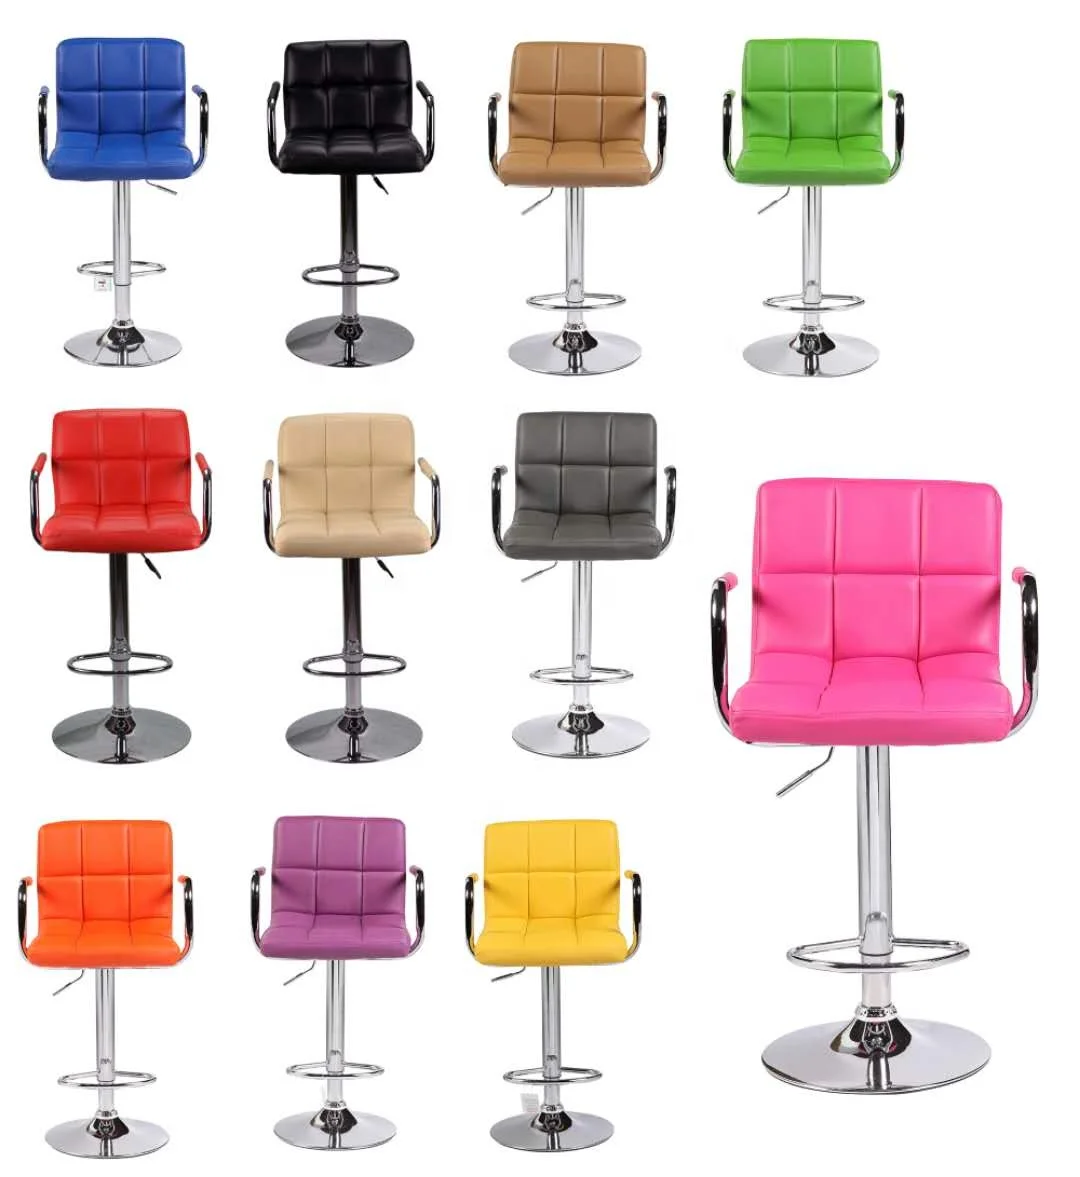 
PU leather or Velvet Adjustable Swivel Chair Industrial Furniture Kitchen Bar Stool Chair with Back 